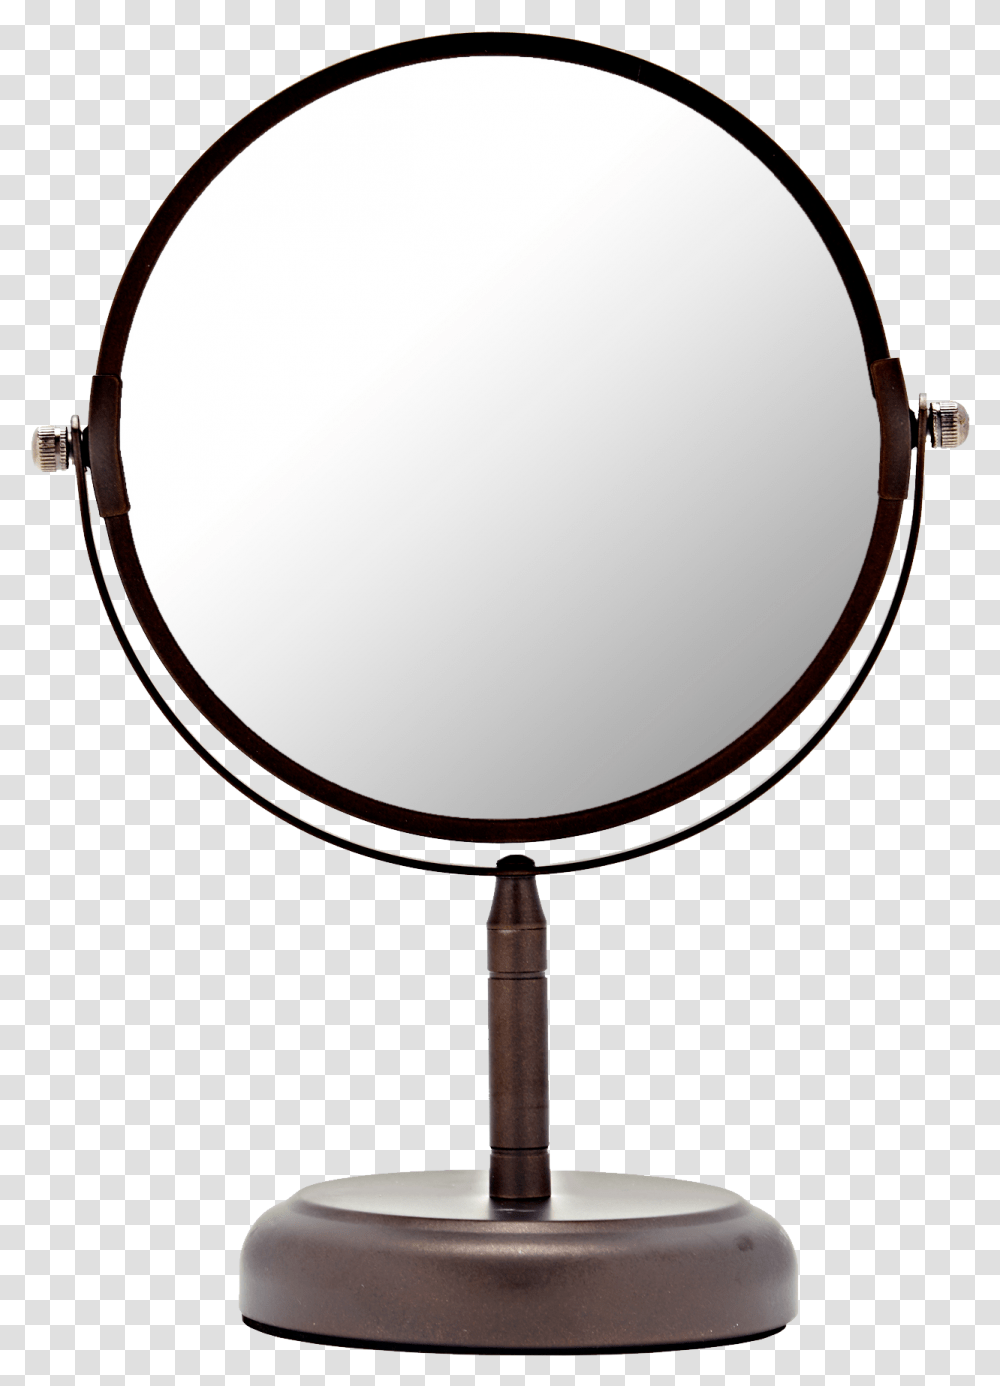 Pin Mirror Background, Lamp, Sunglasses, Accessories, Accessory Transparent Png